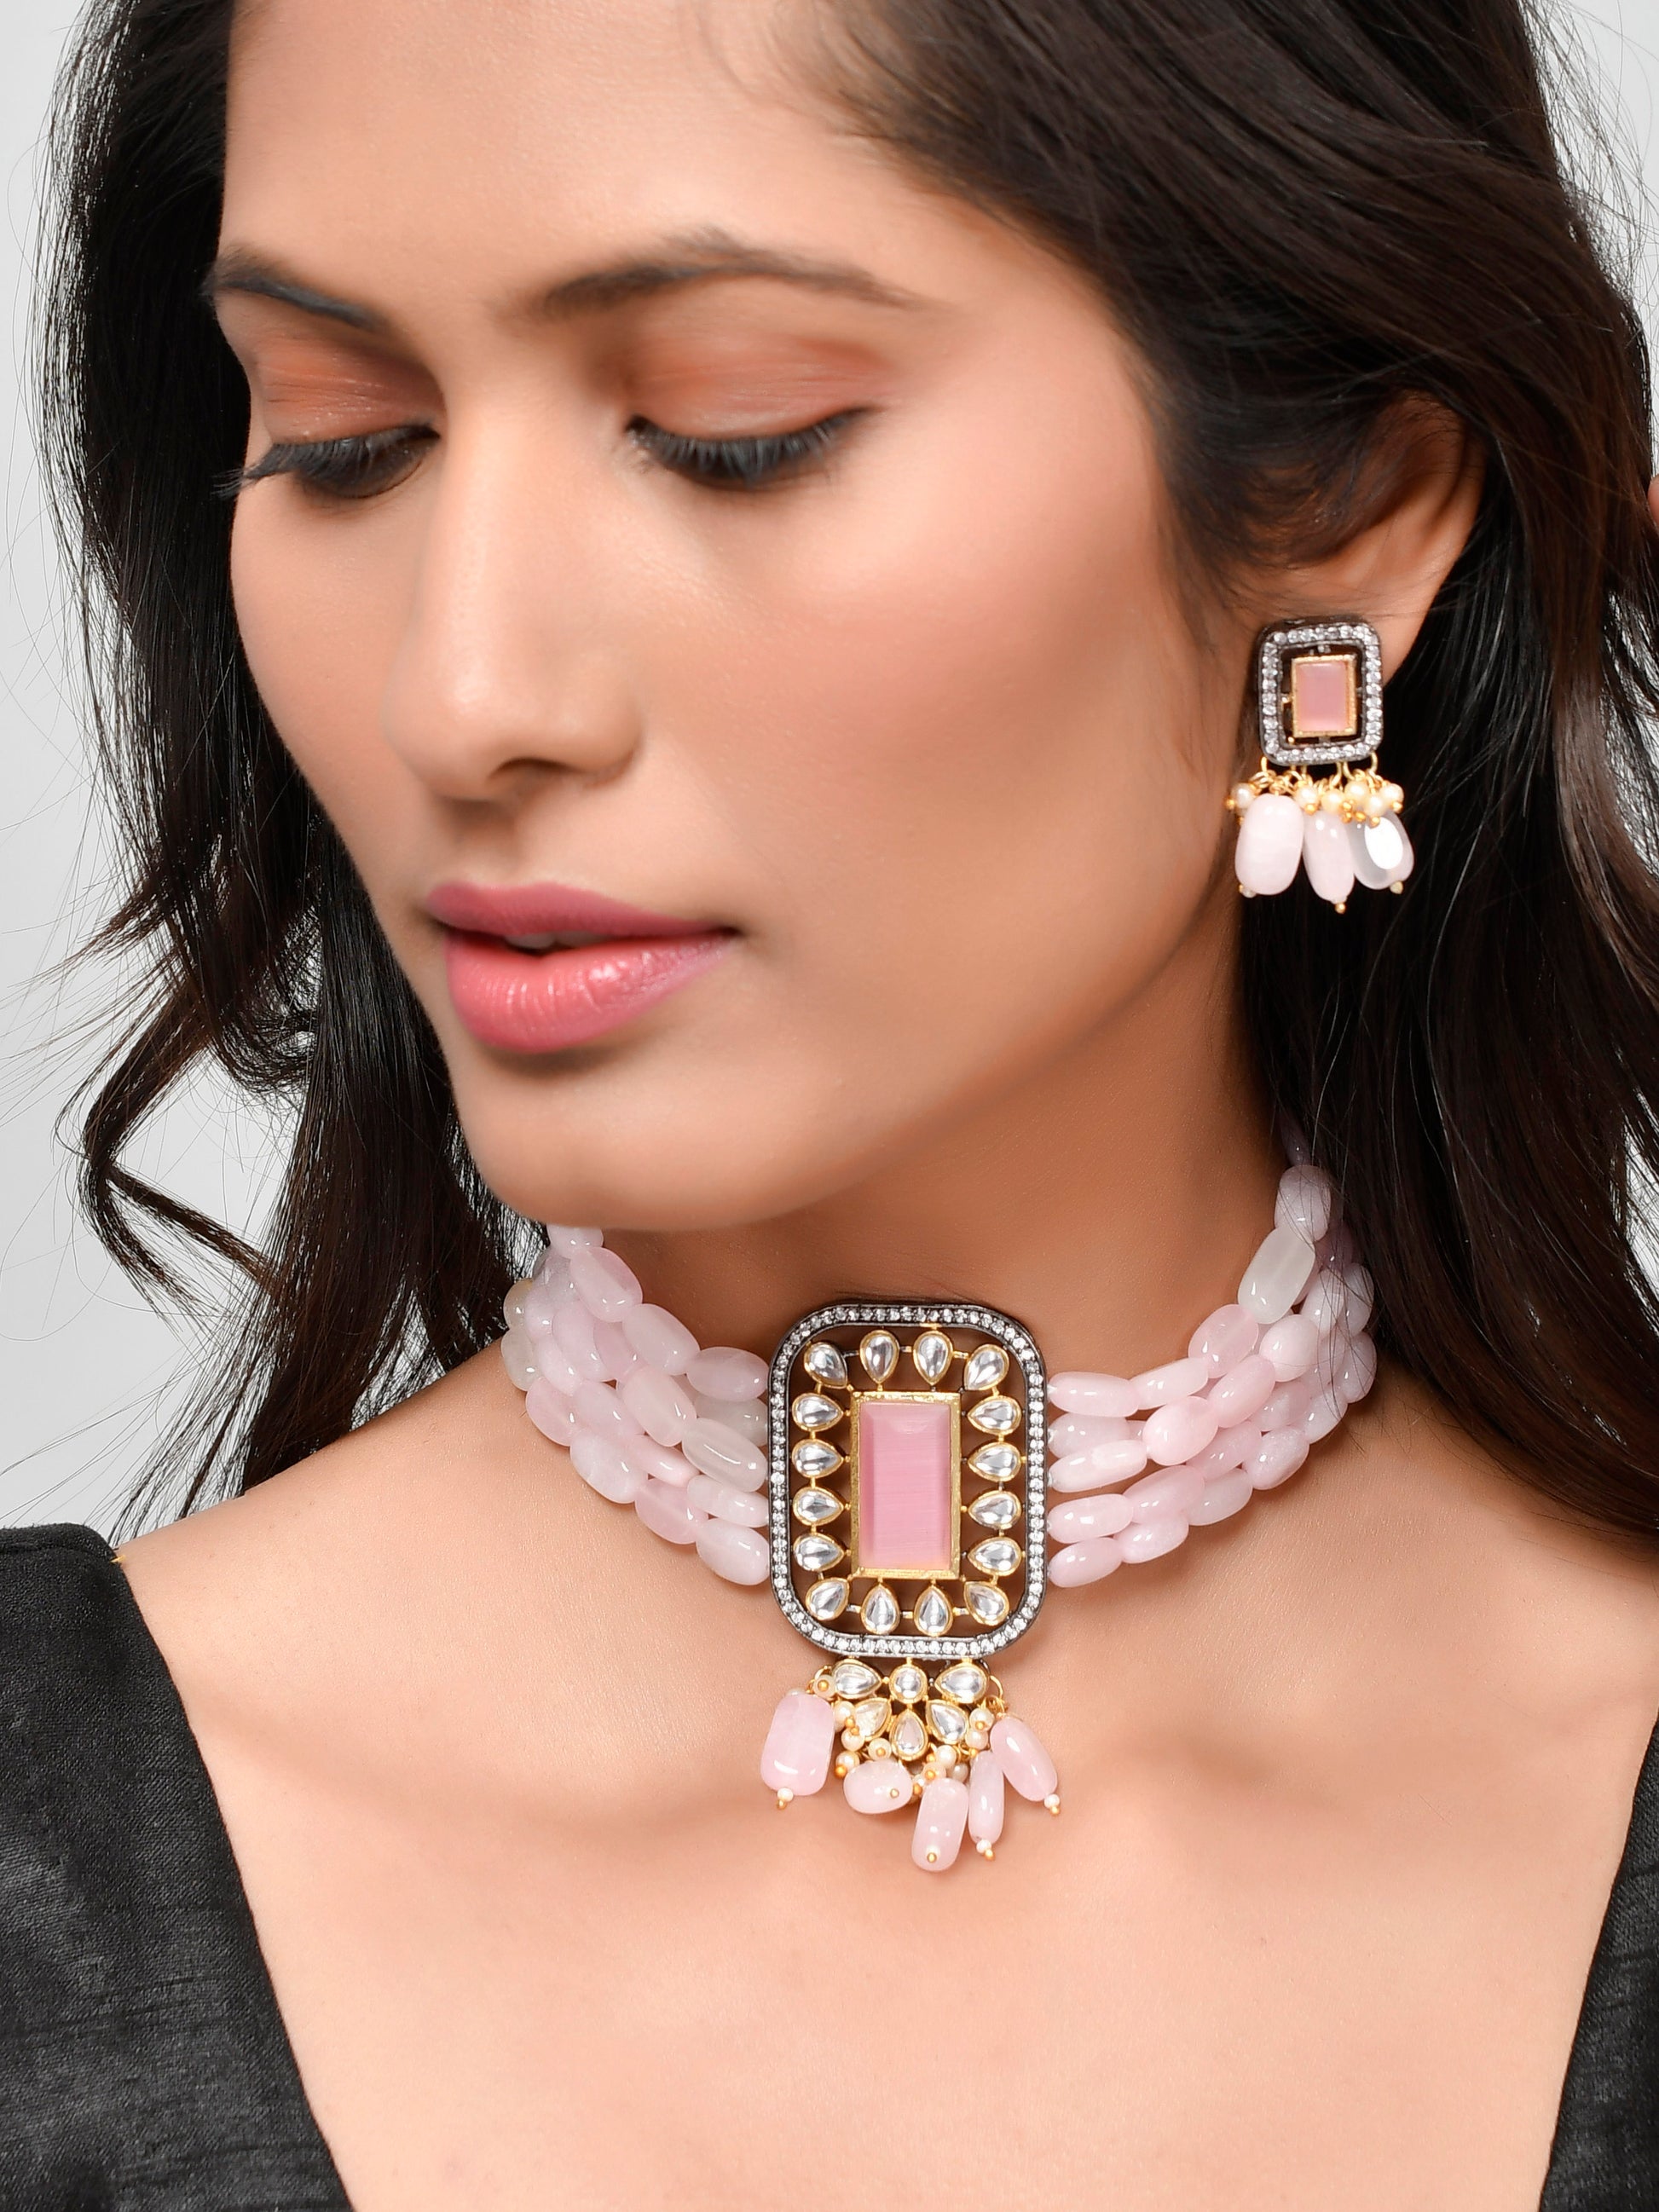 Shop This stunning handcrafted pink beaded kundan Choker jewellery set is the perfect addition to any woman or girl's collection. Made with intricate detail and high-quality materials, this set exudes elegance and sophistication.